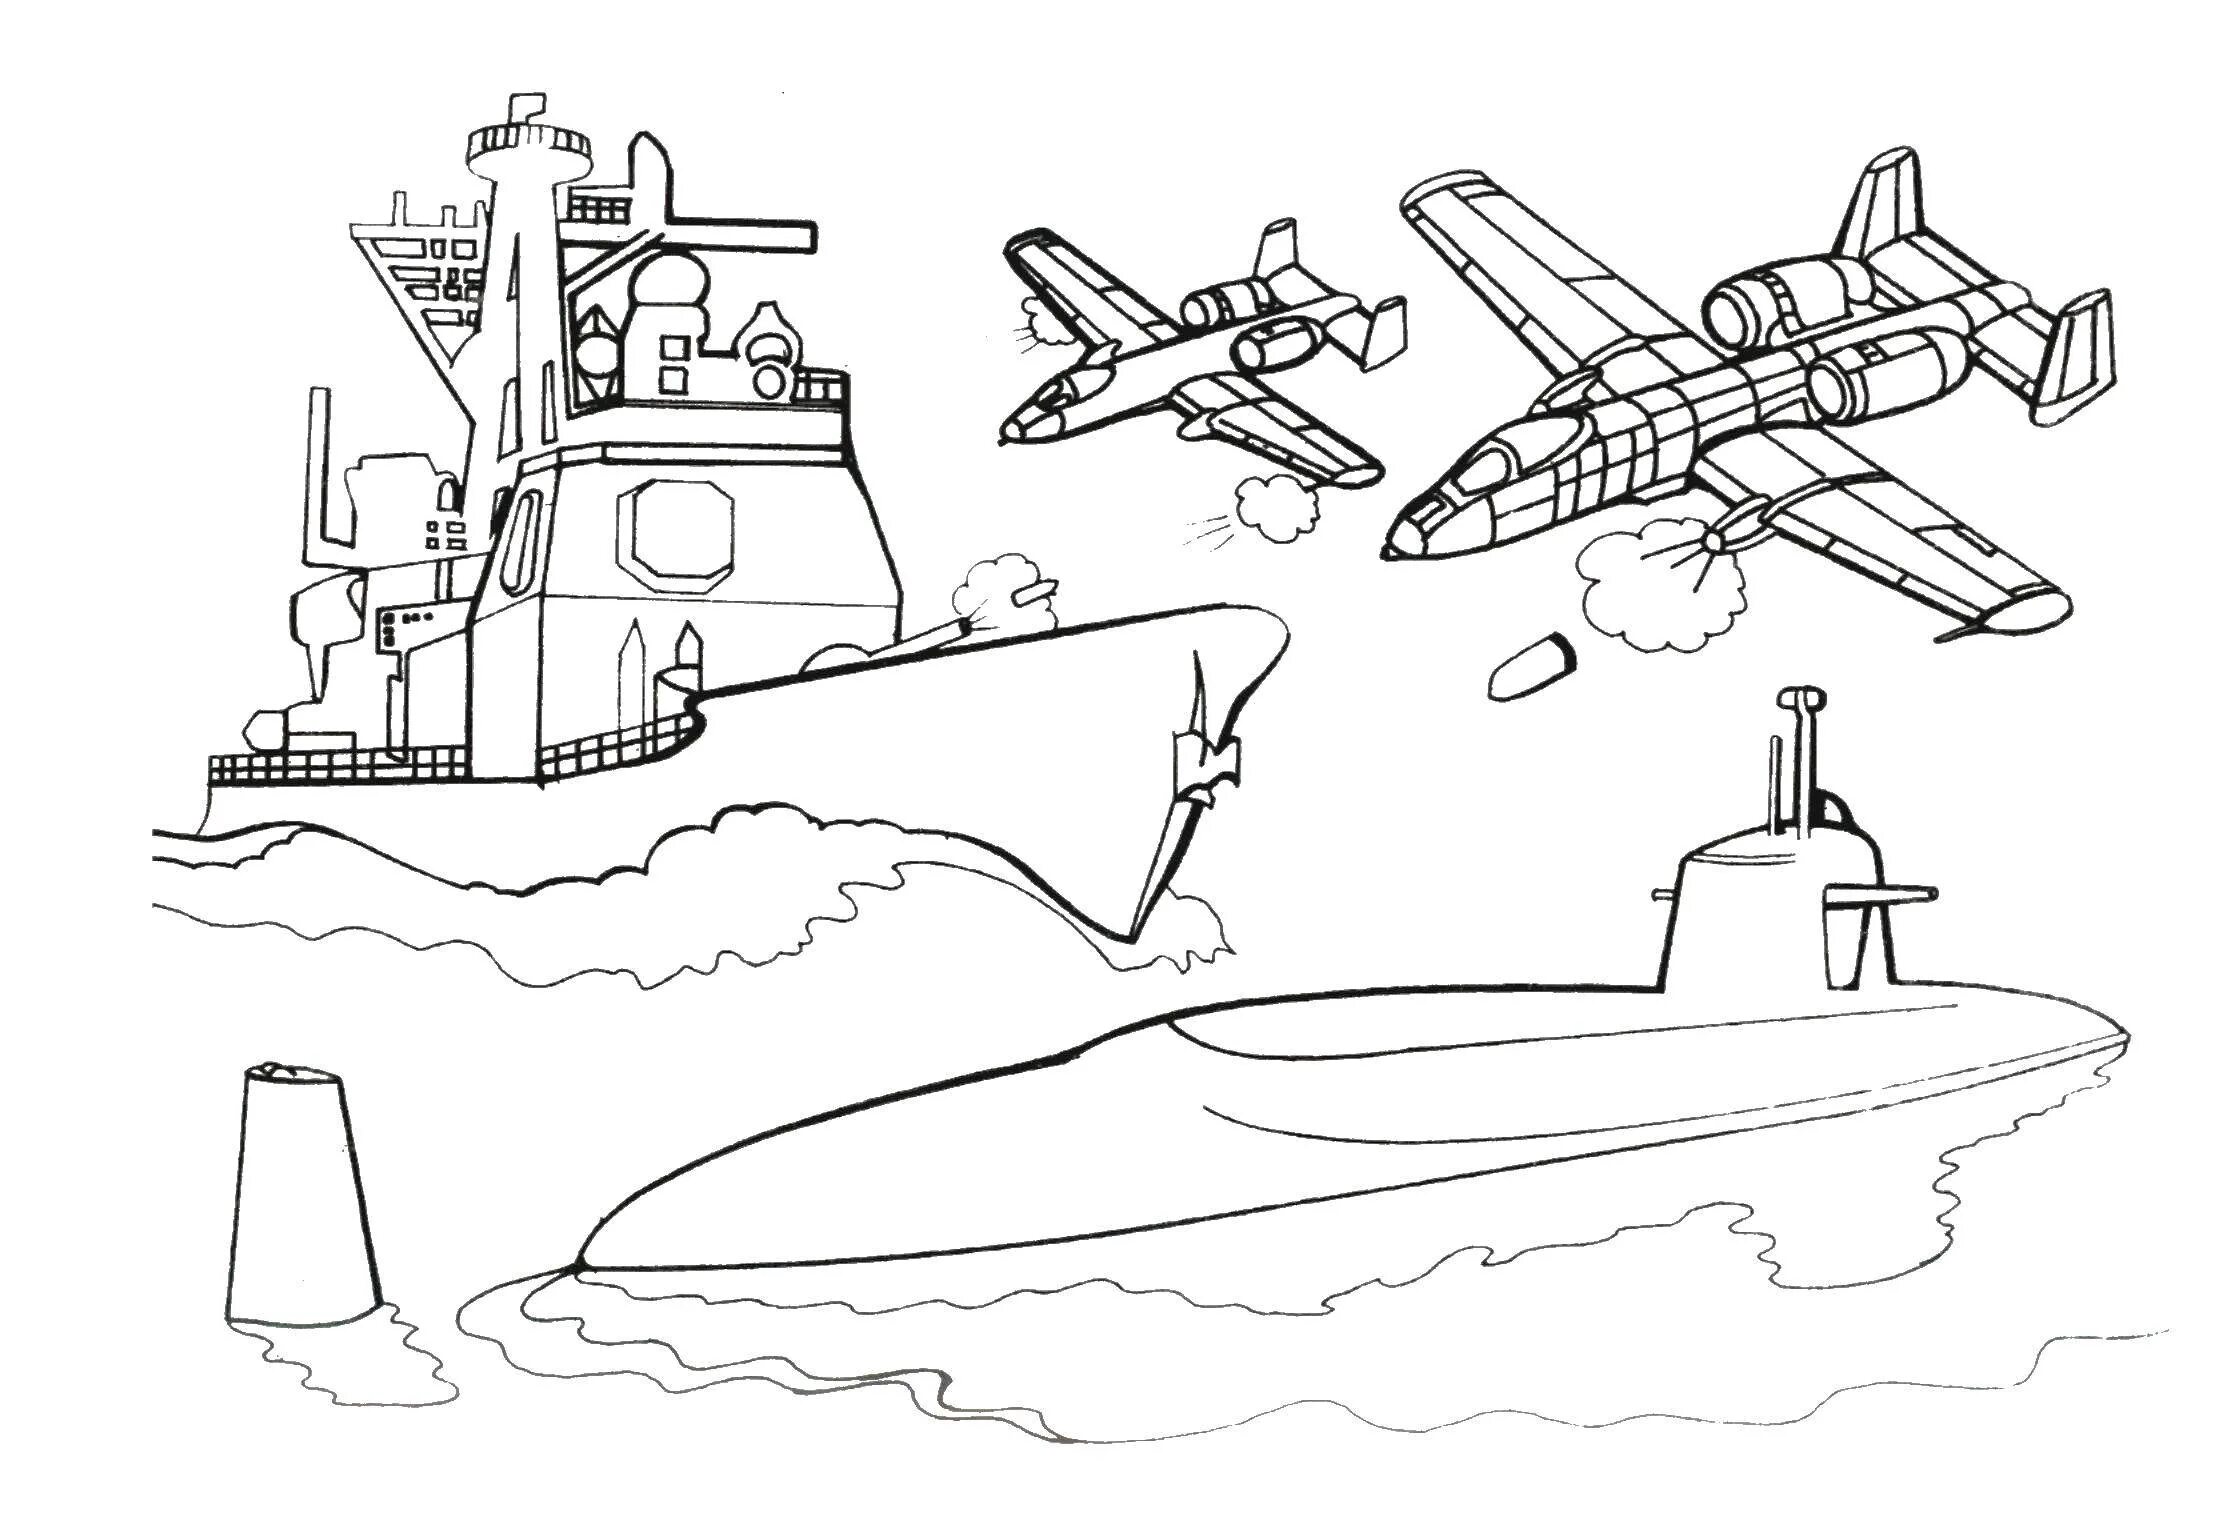 Fabulous military vehicle coloring page